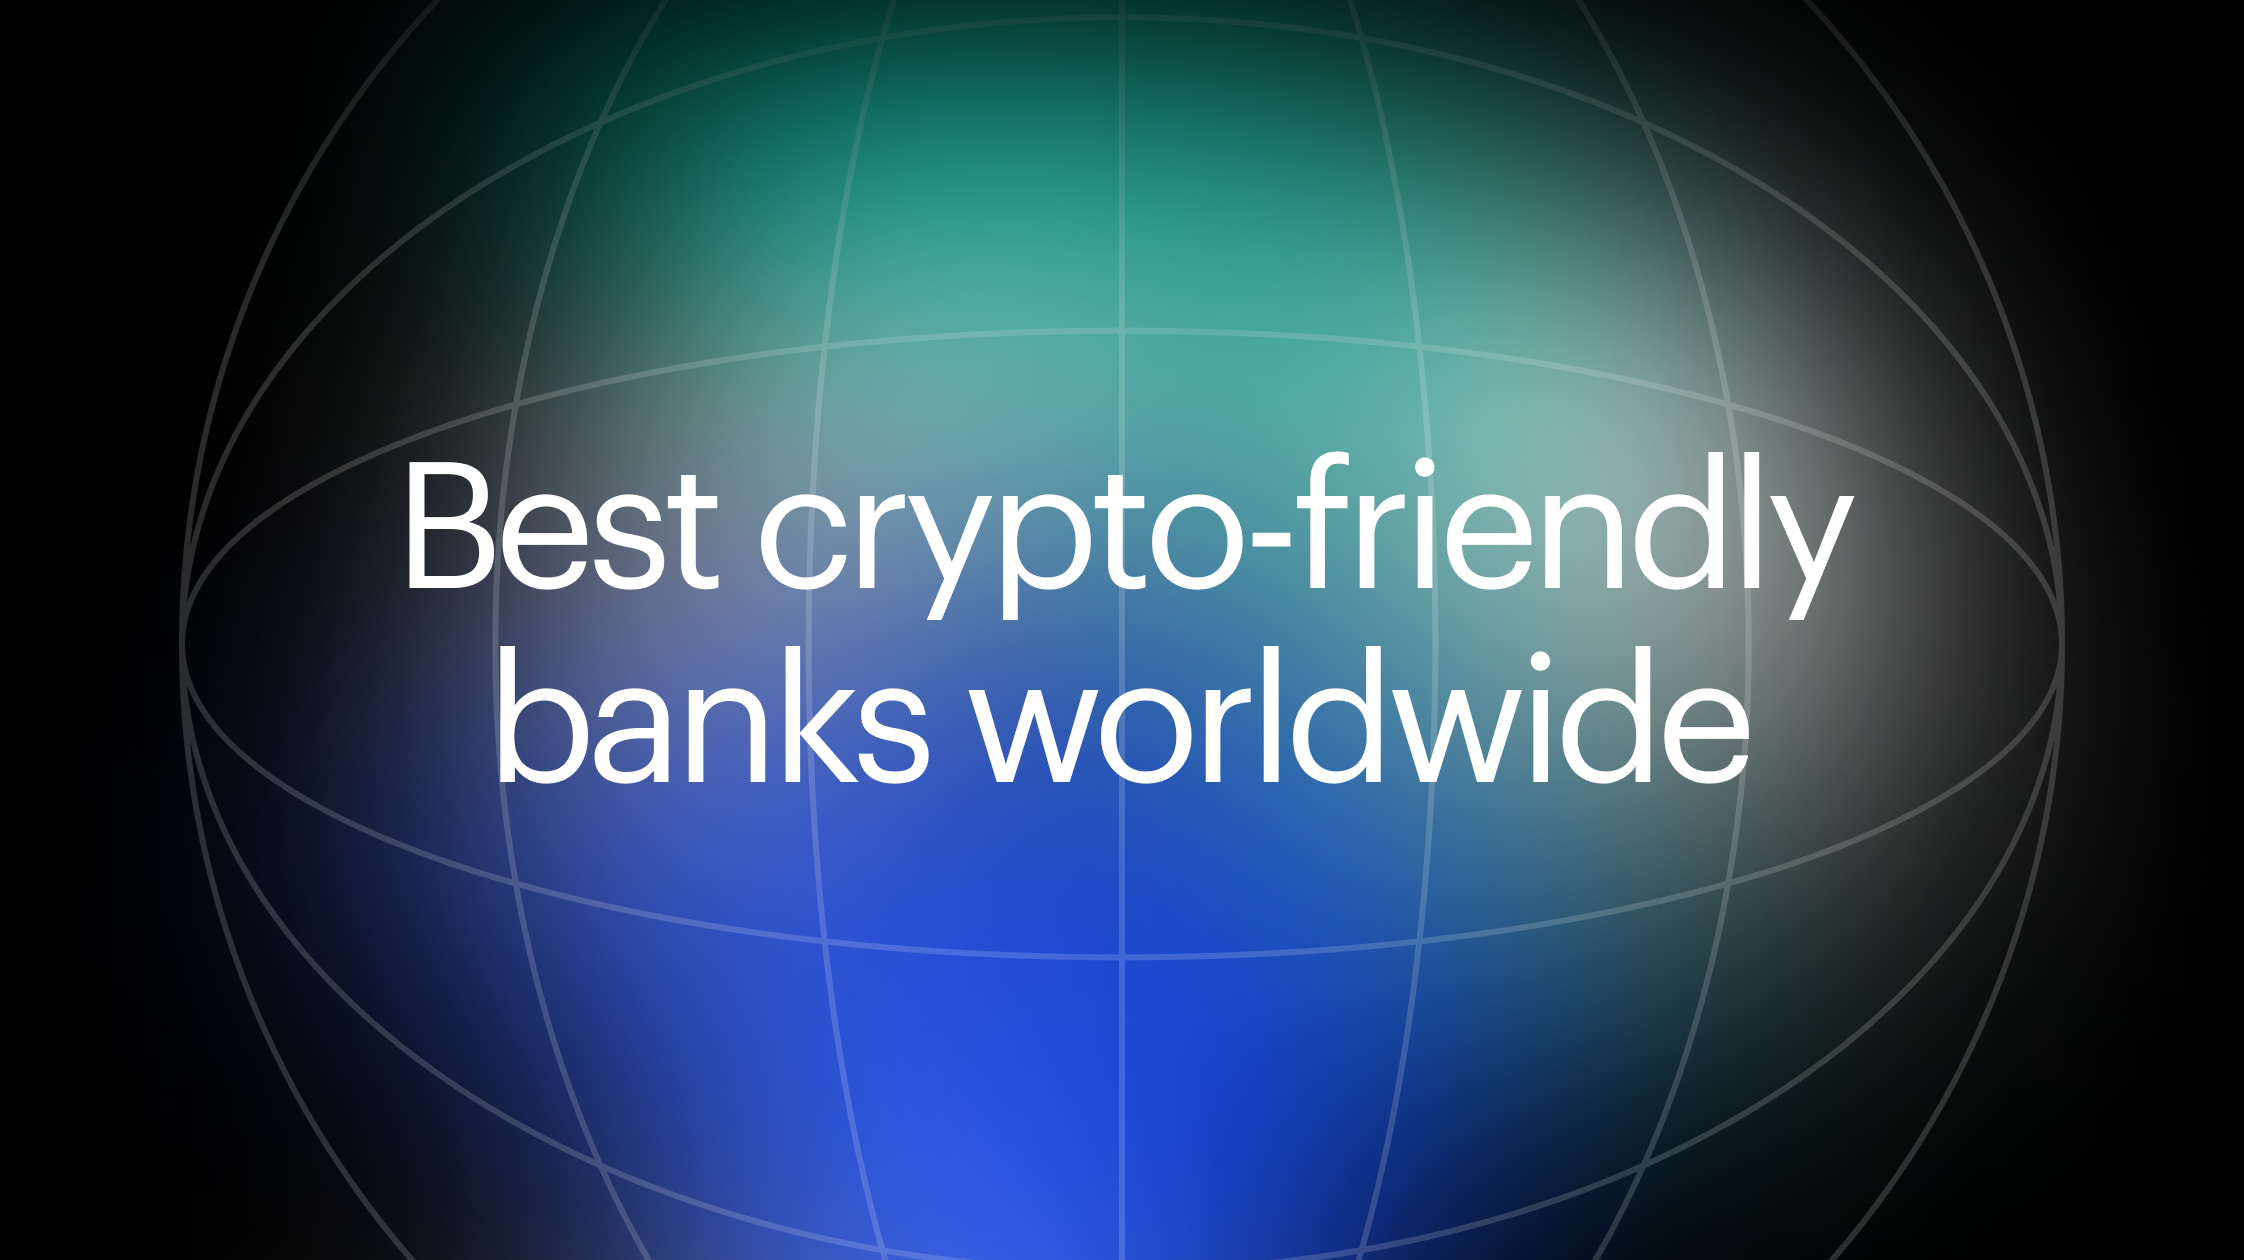 Best crypto-friendly banks worldwide: an in-depth look at the rising need for crypto banks